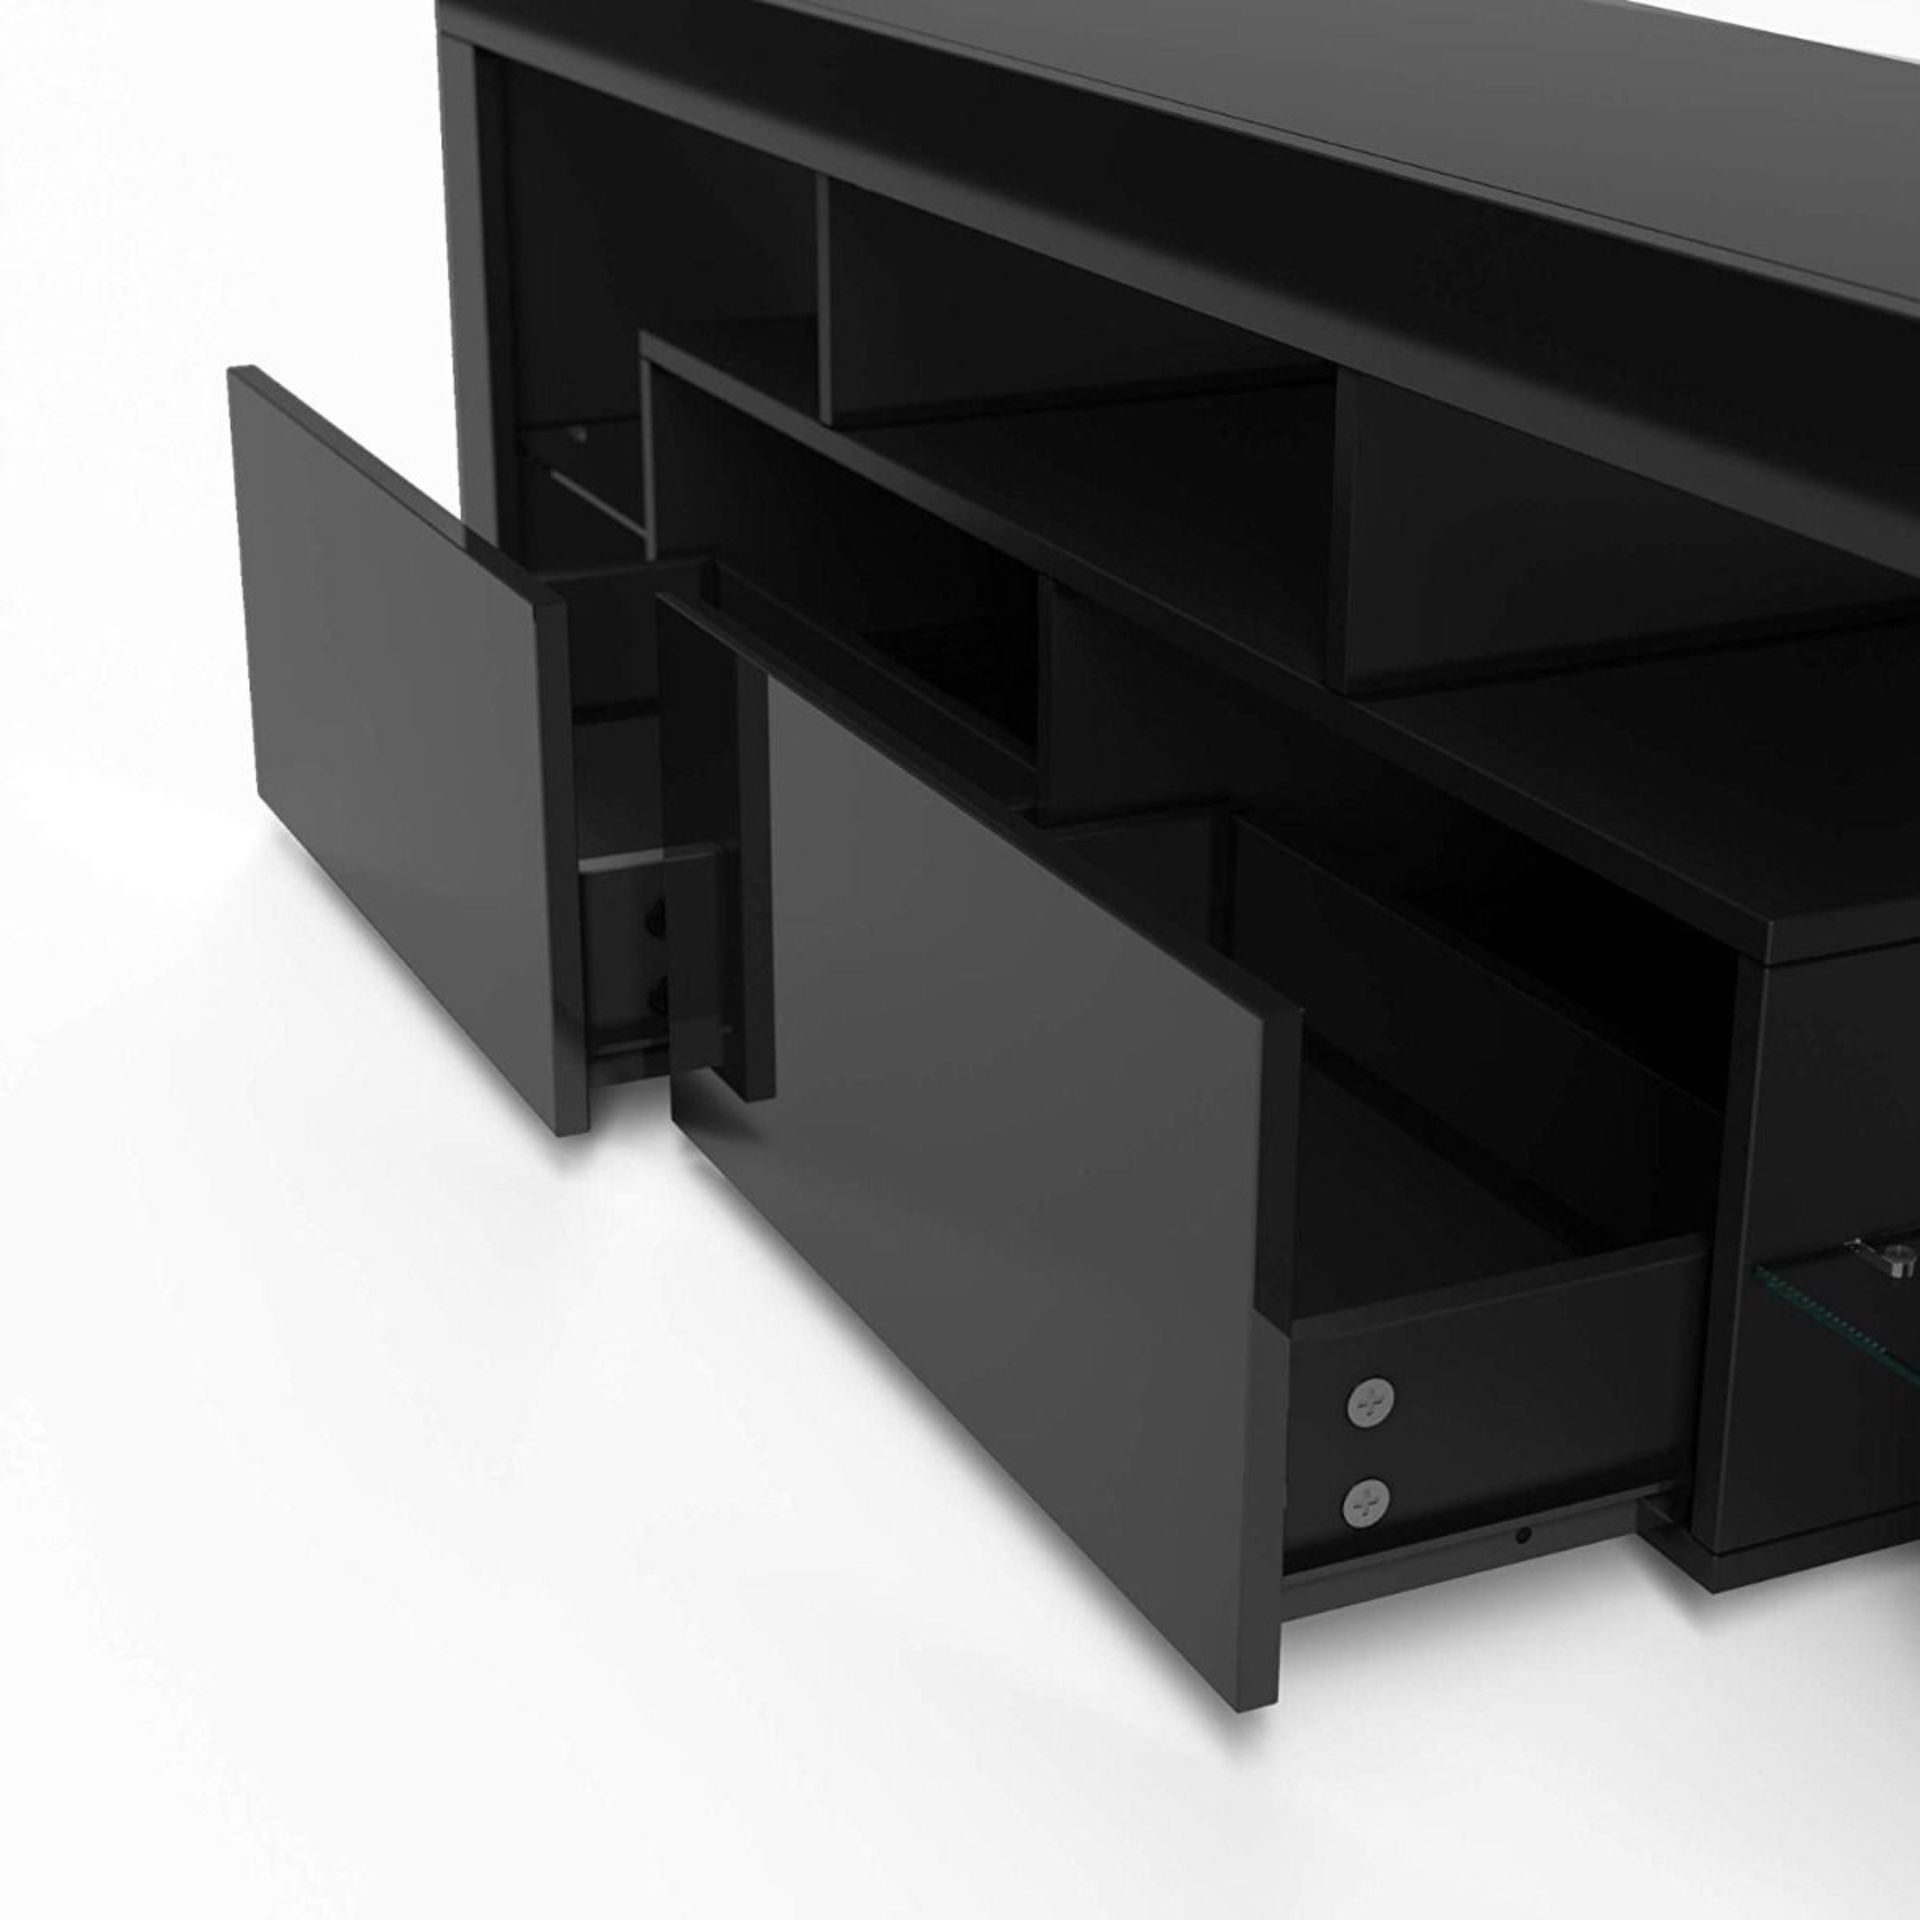 5 X BRAND NEW LED MODERN 160CM TV UNIT CABINET TV STAND HIGH GLOSS DOORS WITH LED LIGHTS - Image 3 of 3